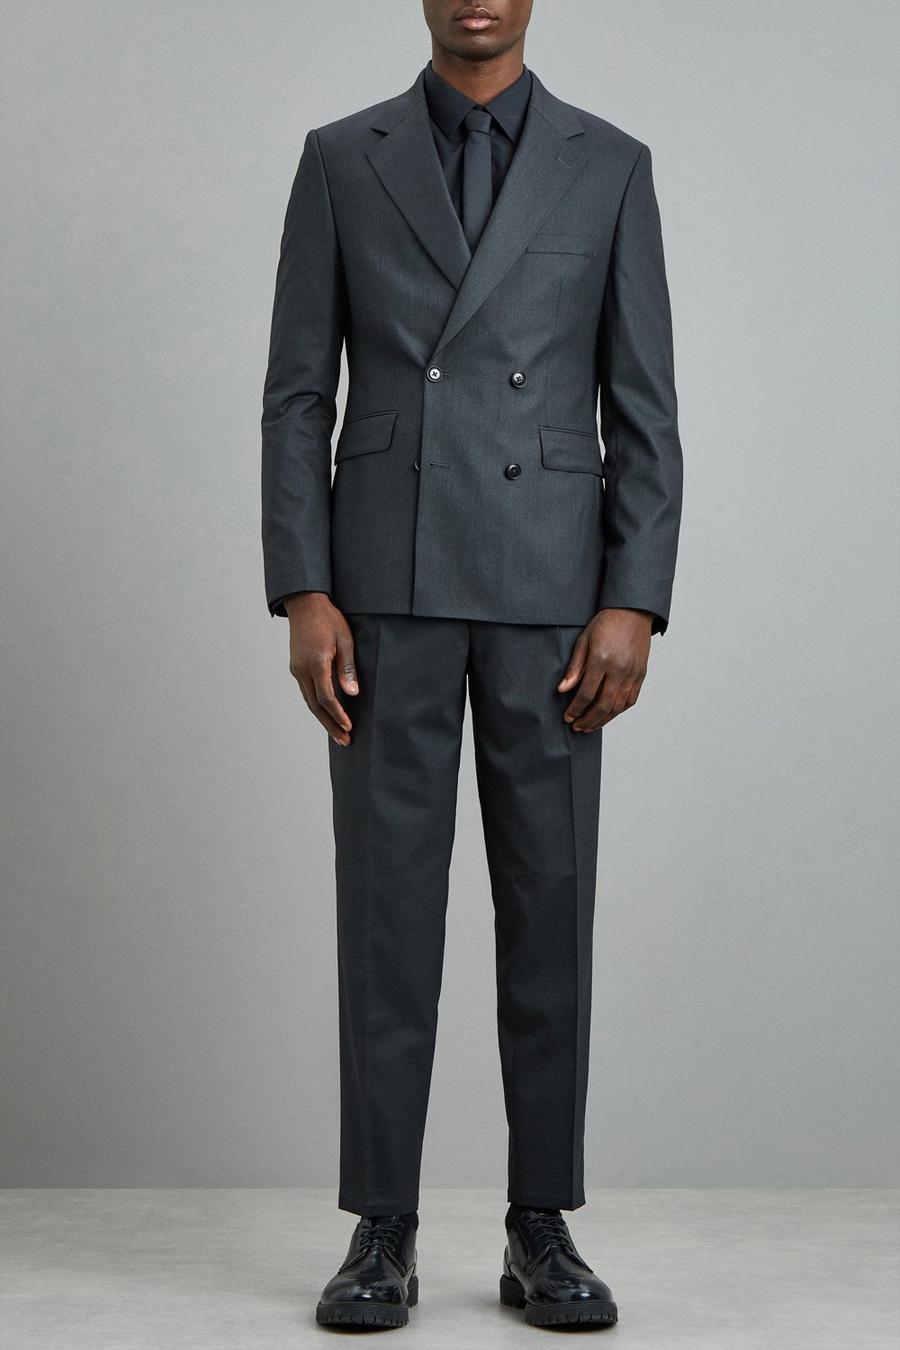 1904 Slim Fit Charcoal Double Breasted Two-Piece Suit